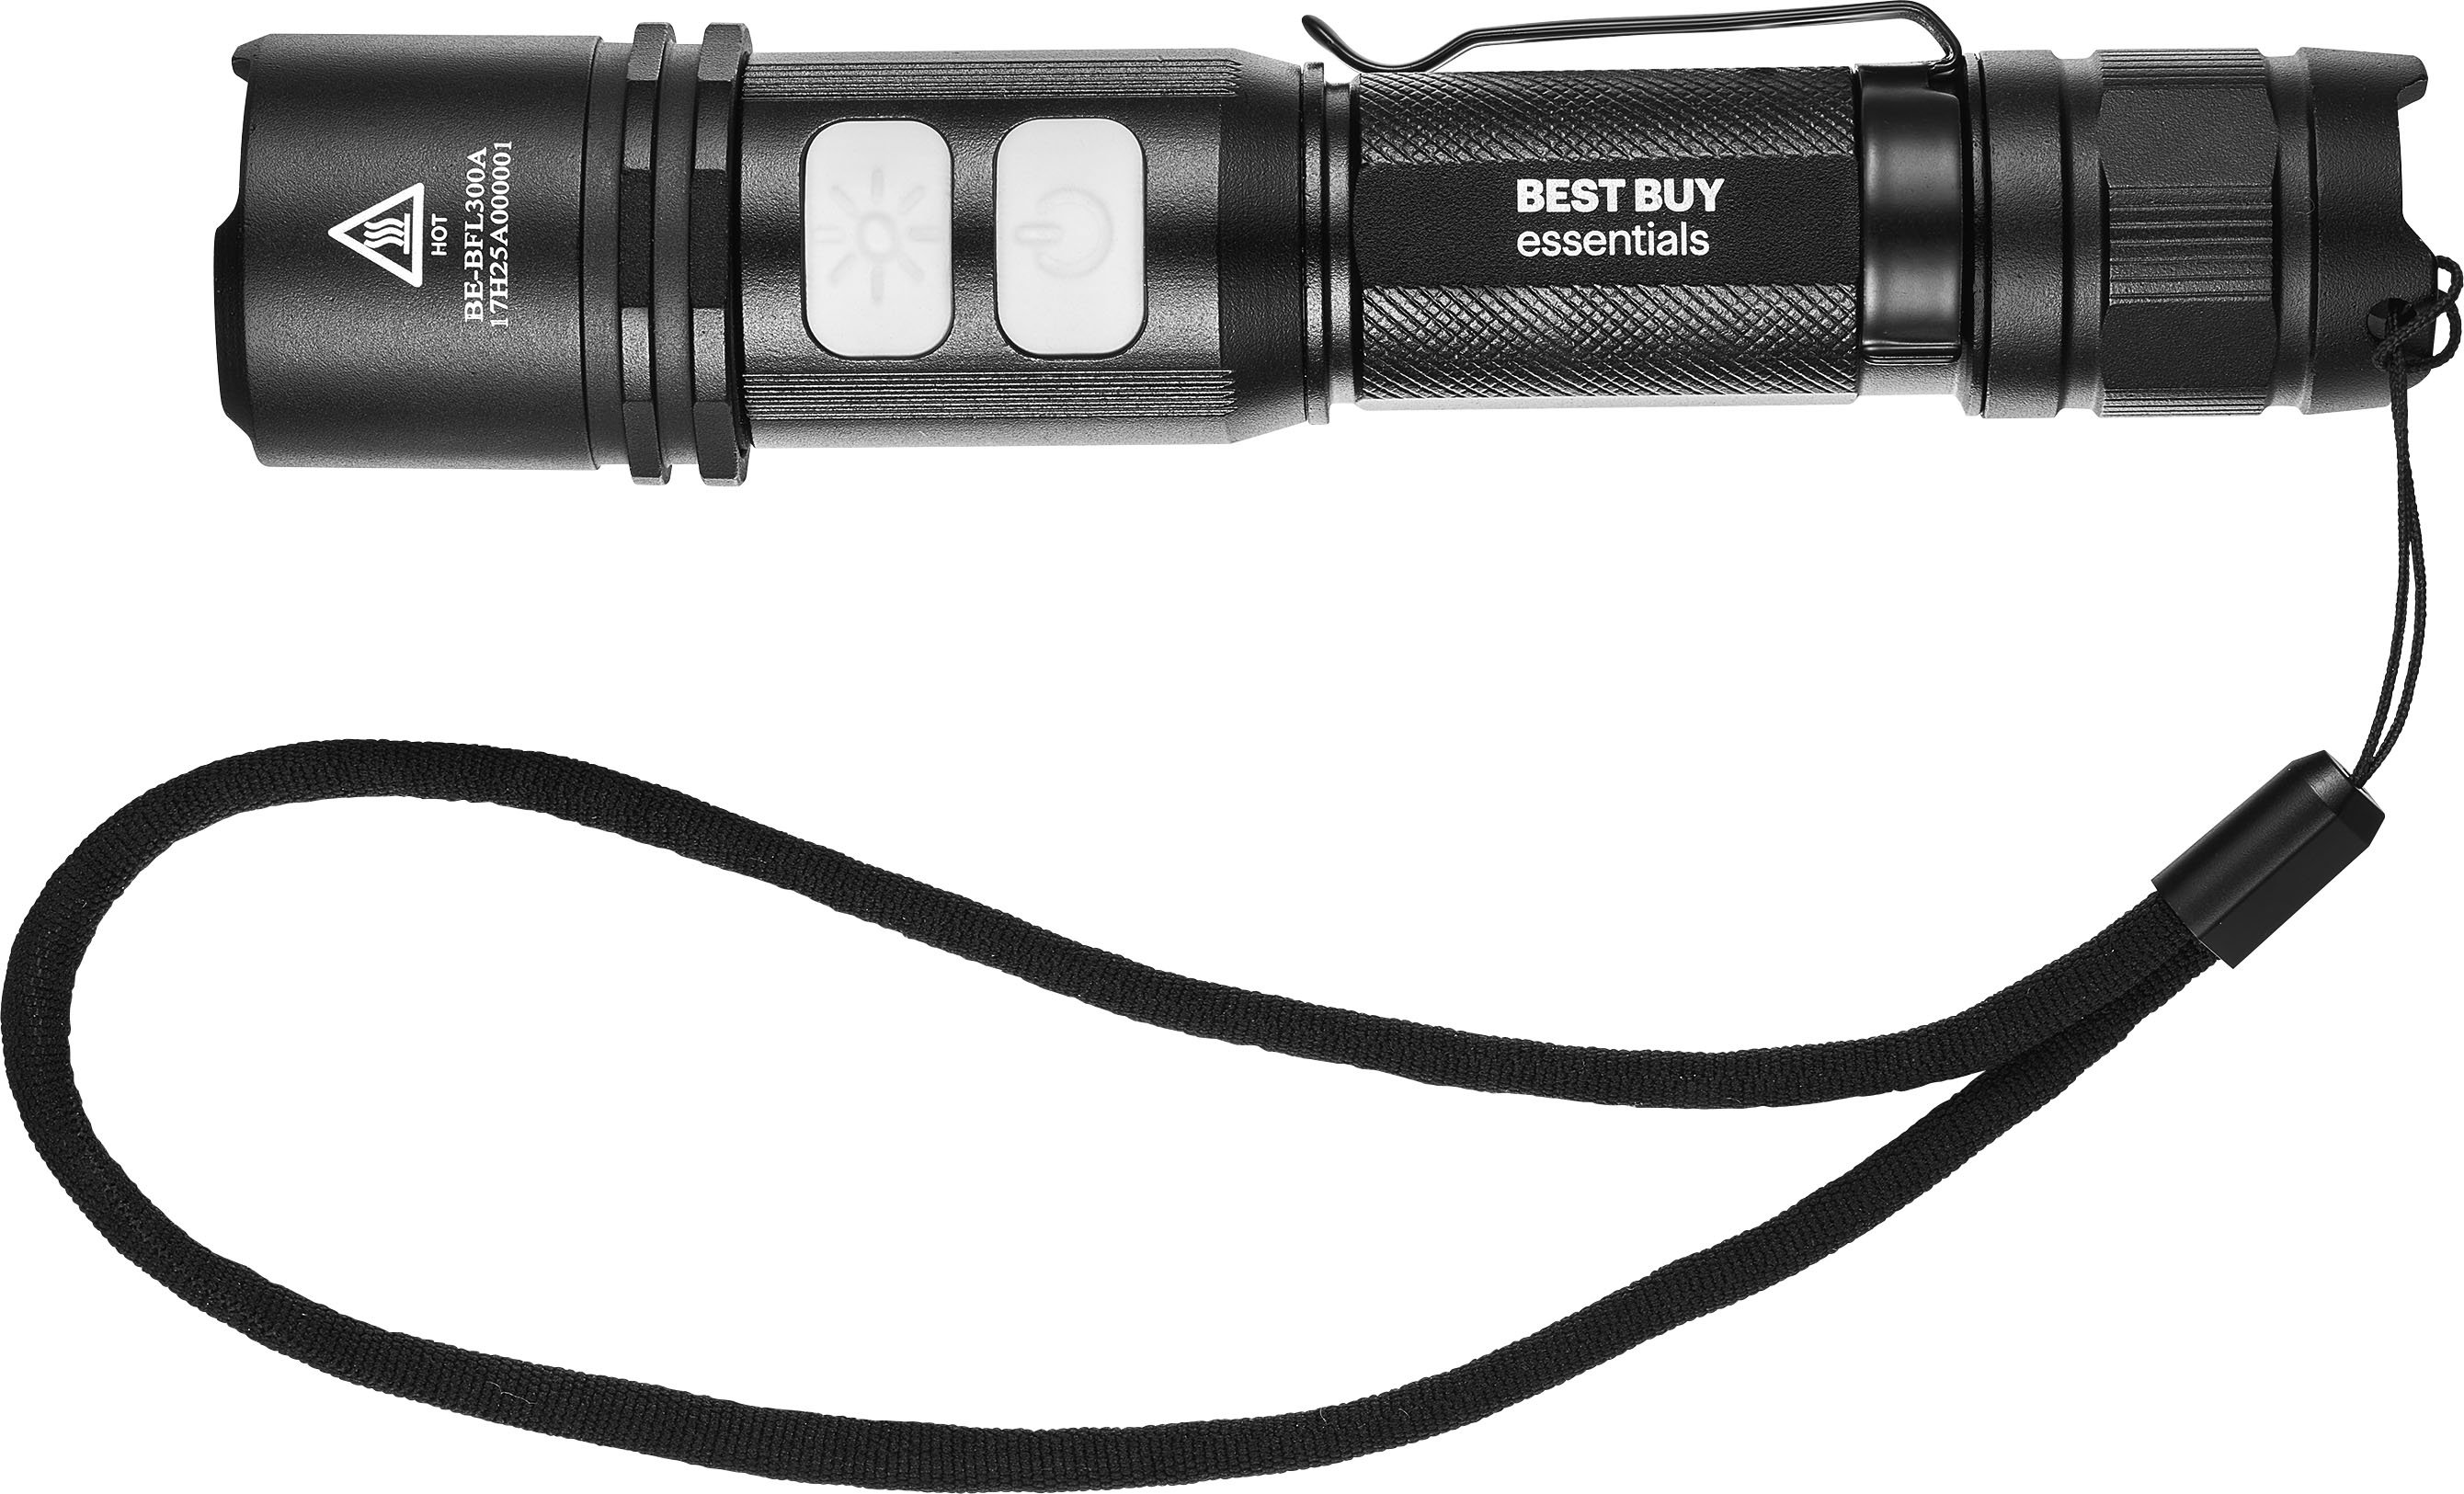 BESTA - Lampe Torche Led Ultra Puissante Rechargeable USB 15000